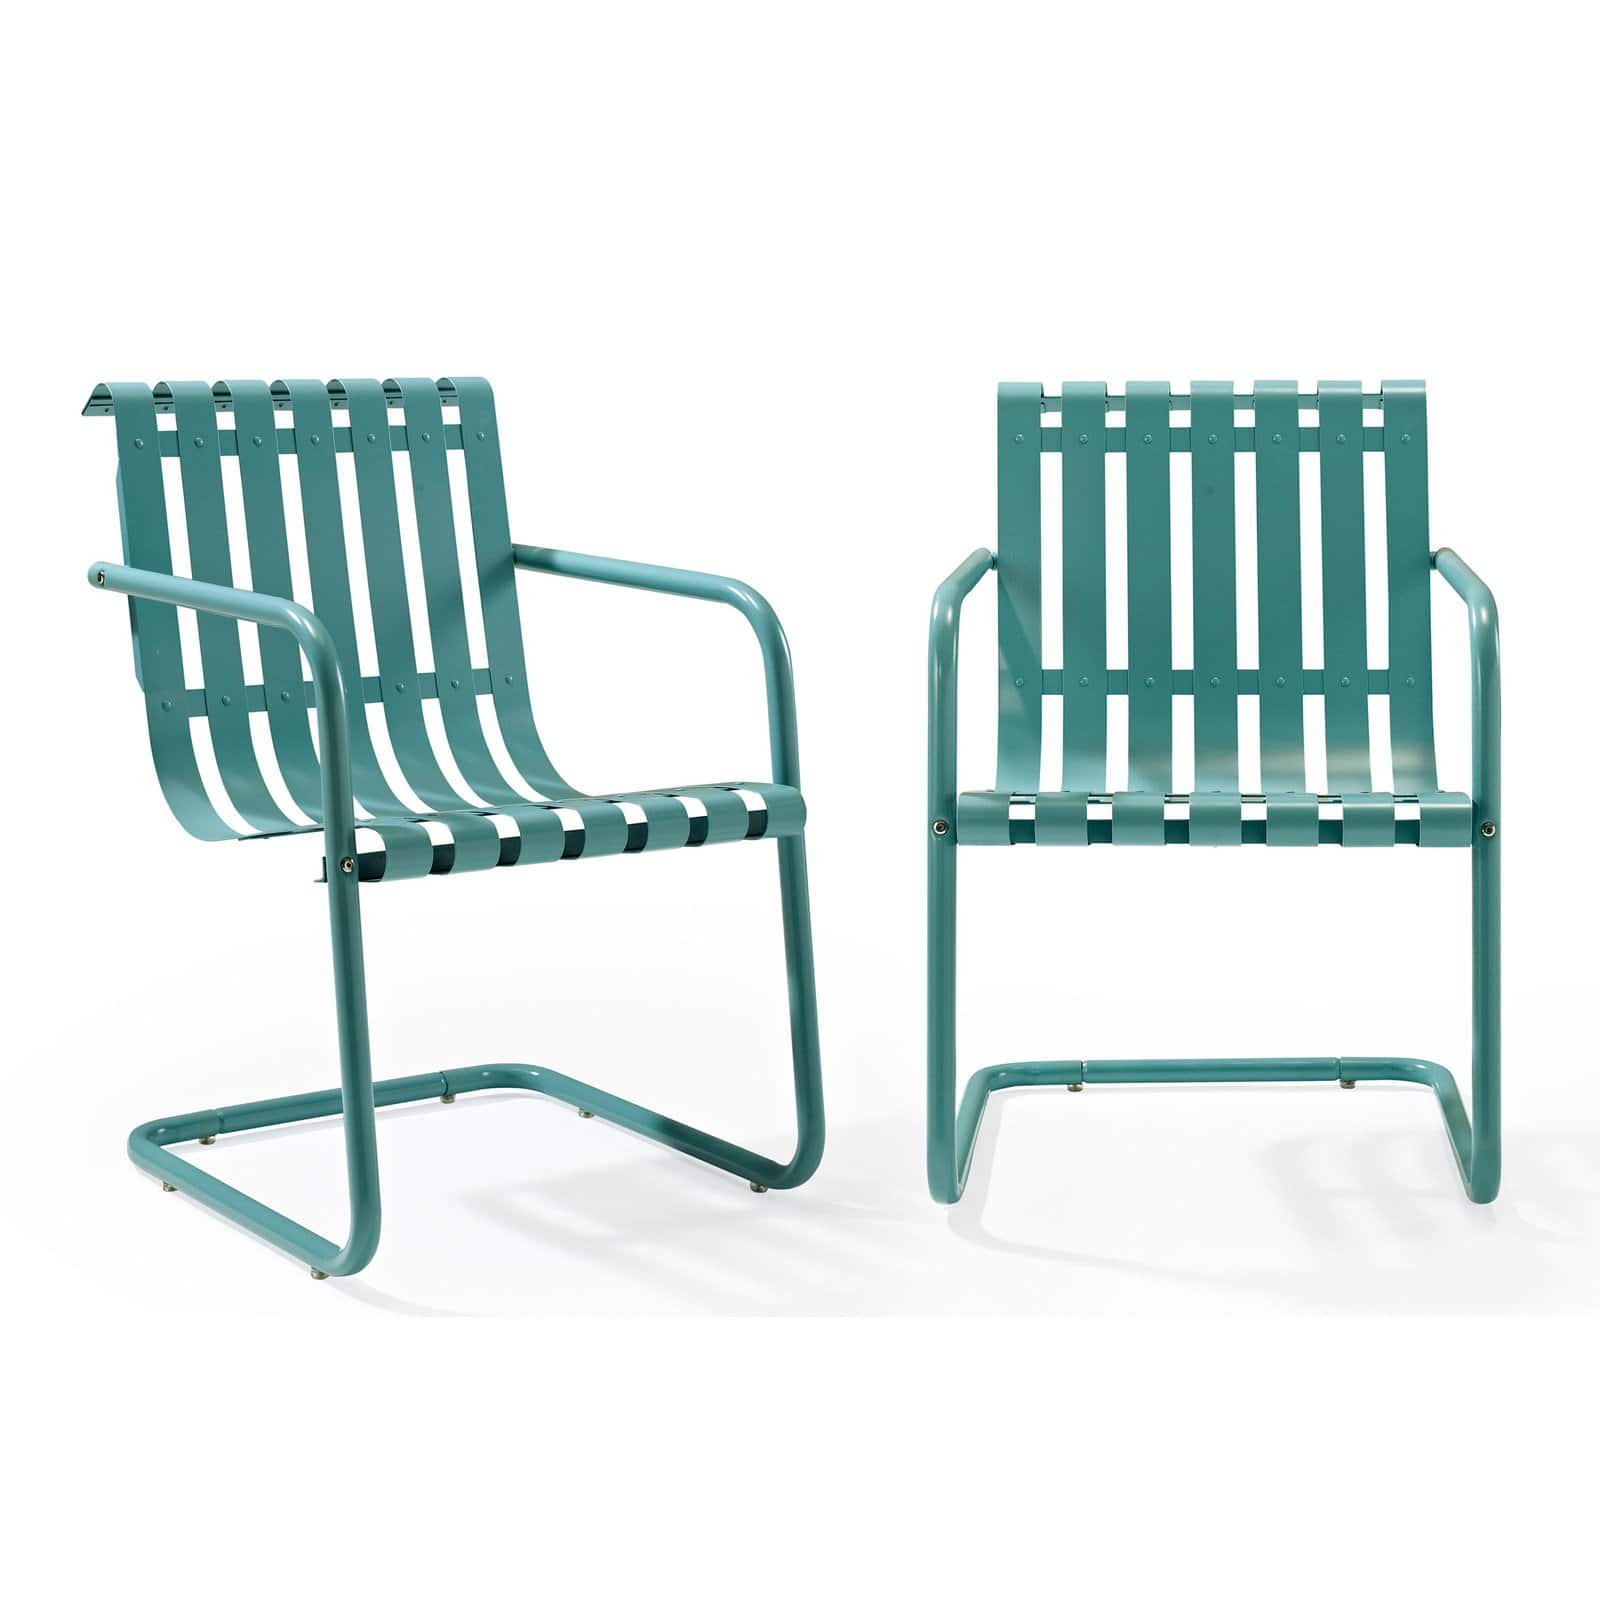 Crosley Gracie Metal Patio Chair in White (Set of 2) - image 2 of 3